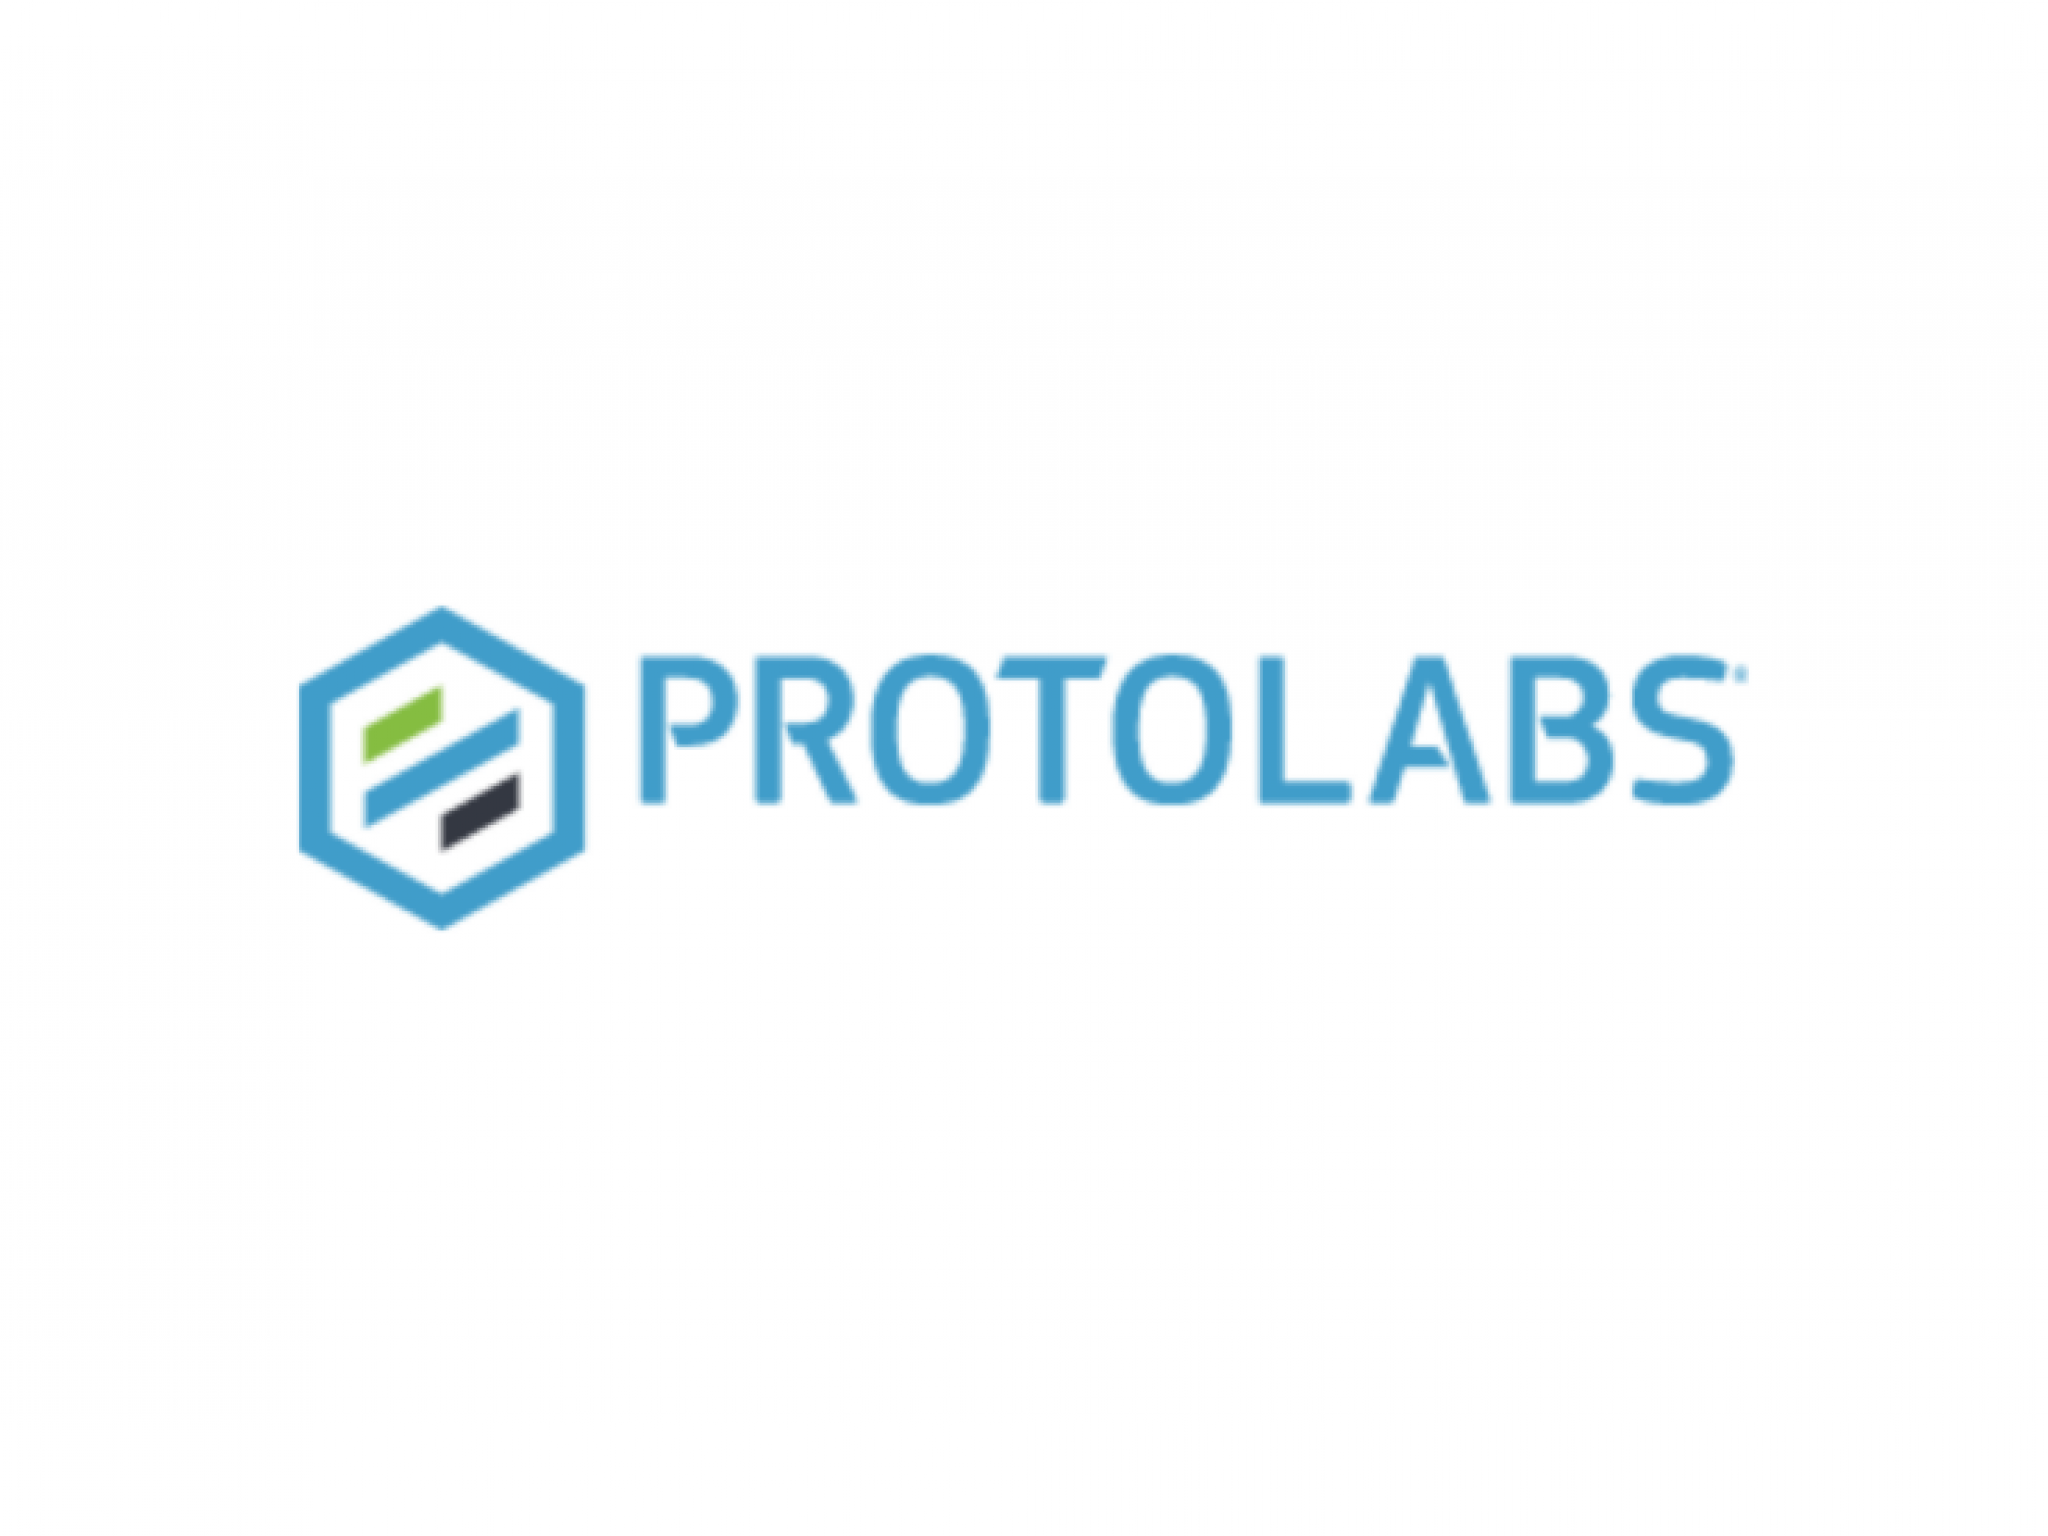  proto-labs-scores-first-quarter-beat-fueled-by-order-growth-higher-margin-factory-business 